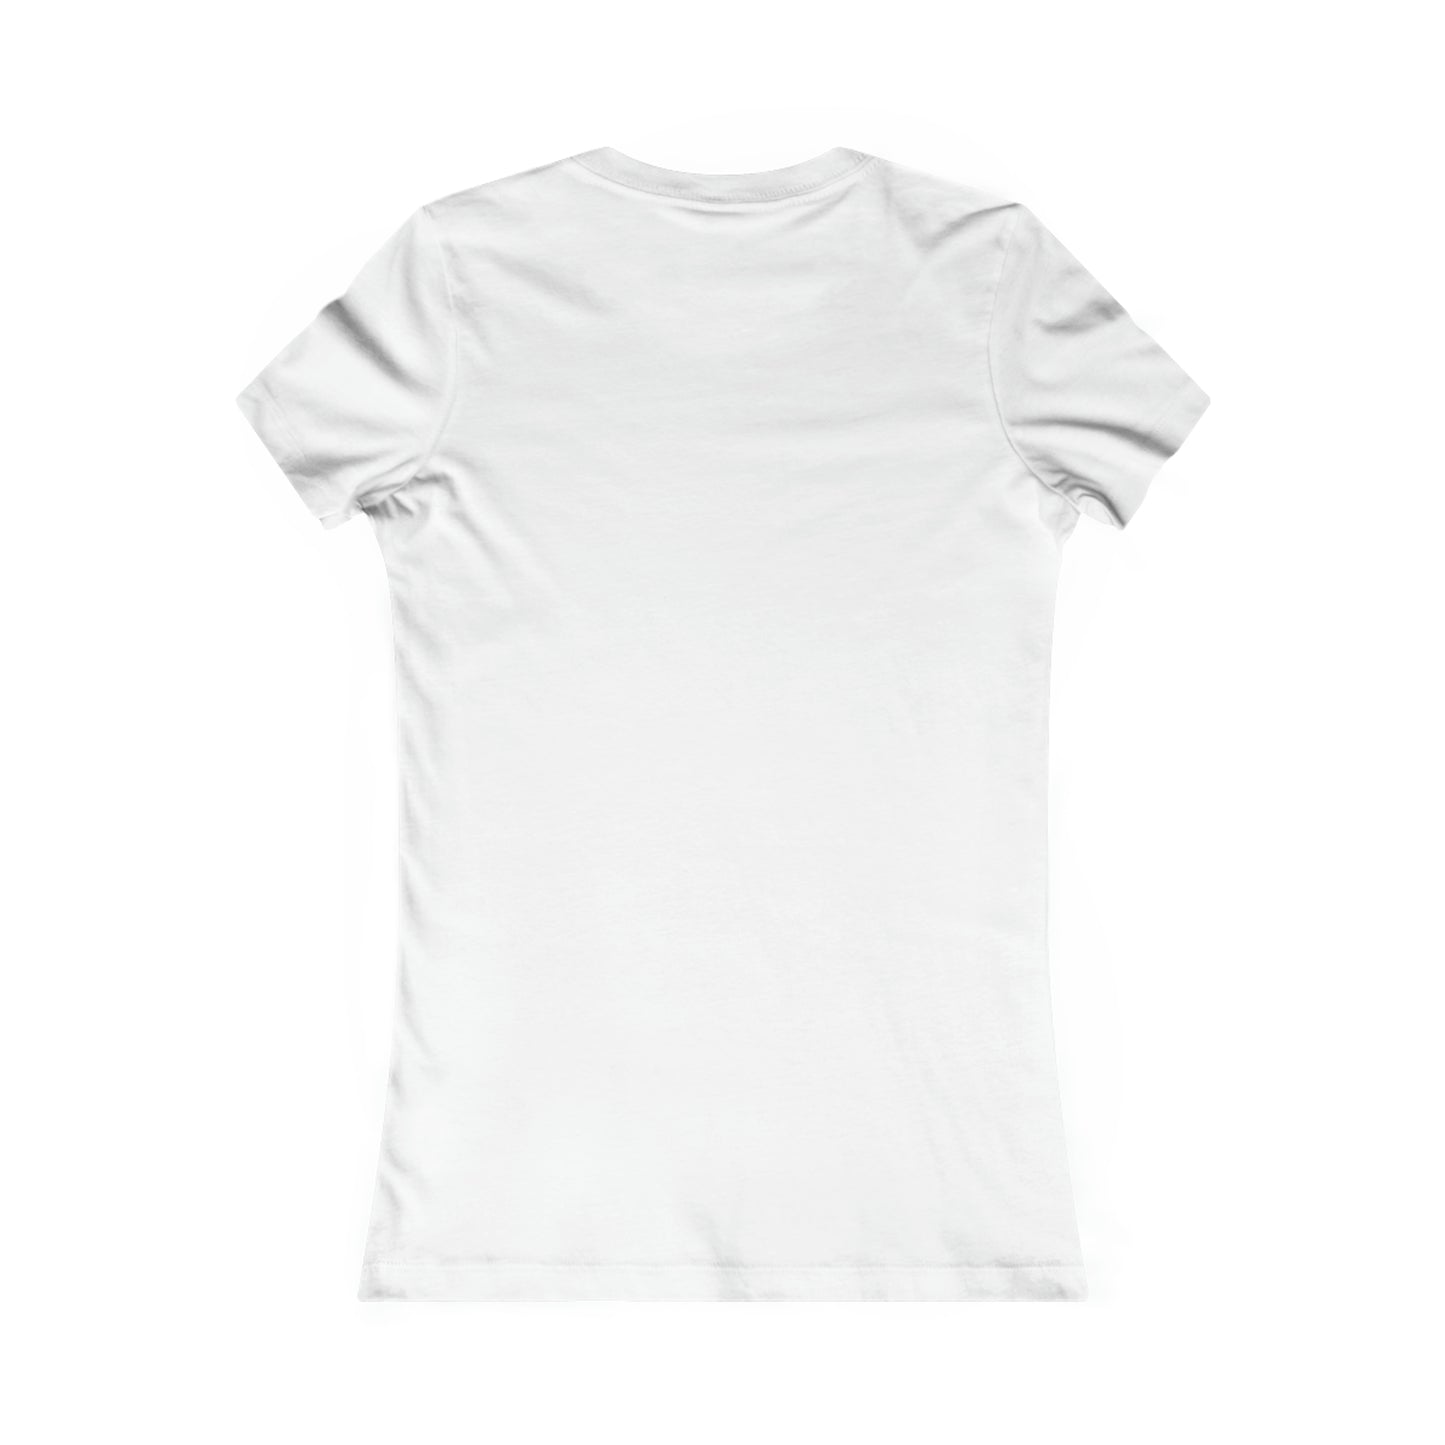 Women's Special Edition "DragonFly" Slim Fit White&Black White Tee